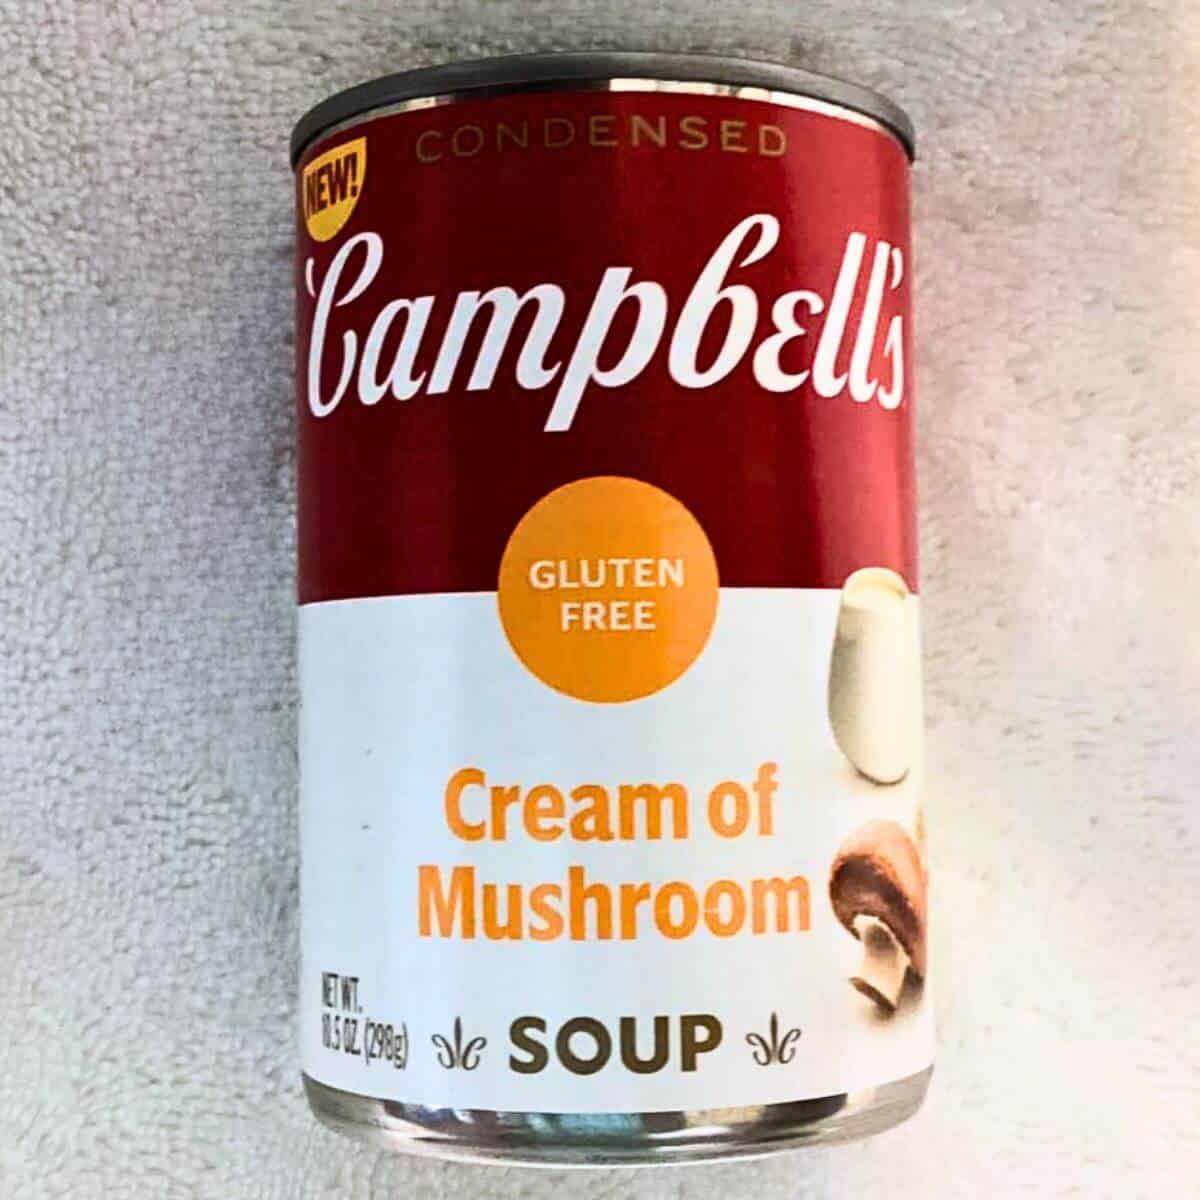 A can of campbell's gluten free cream of mushroom soup.